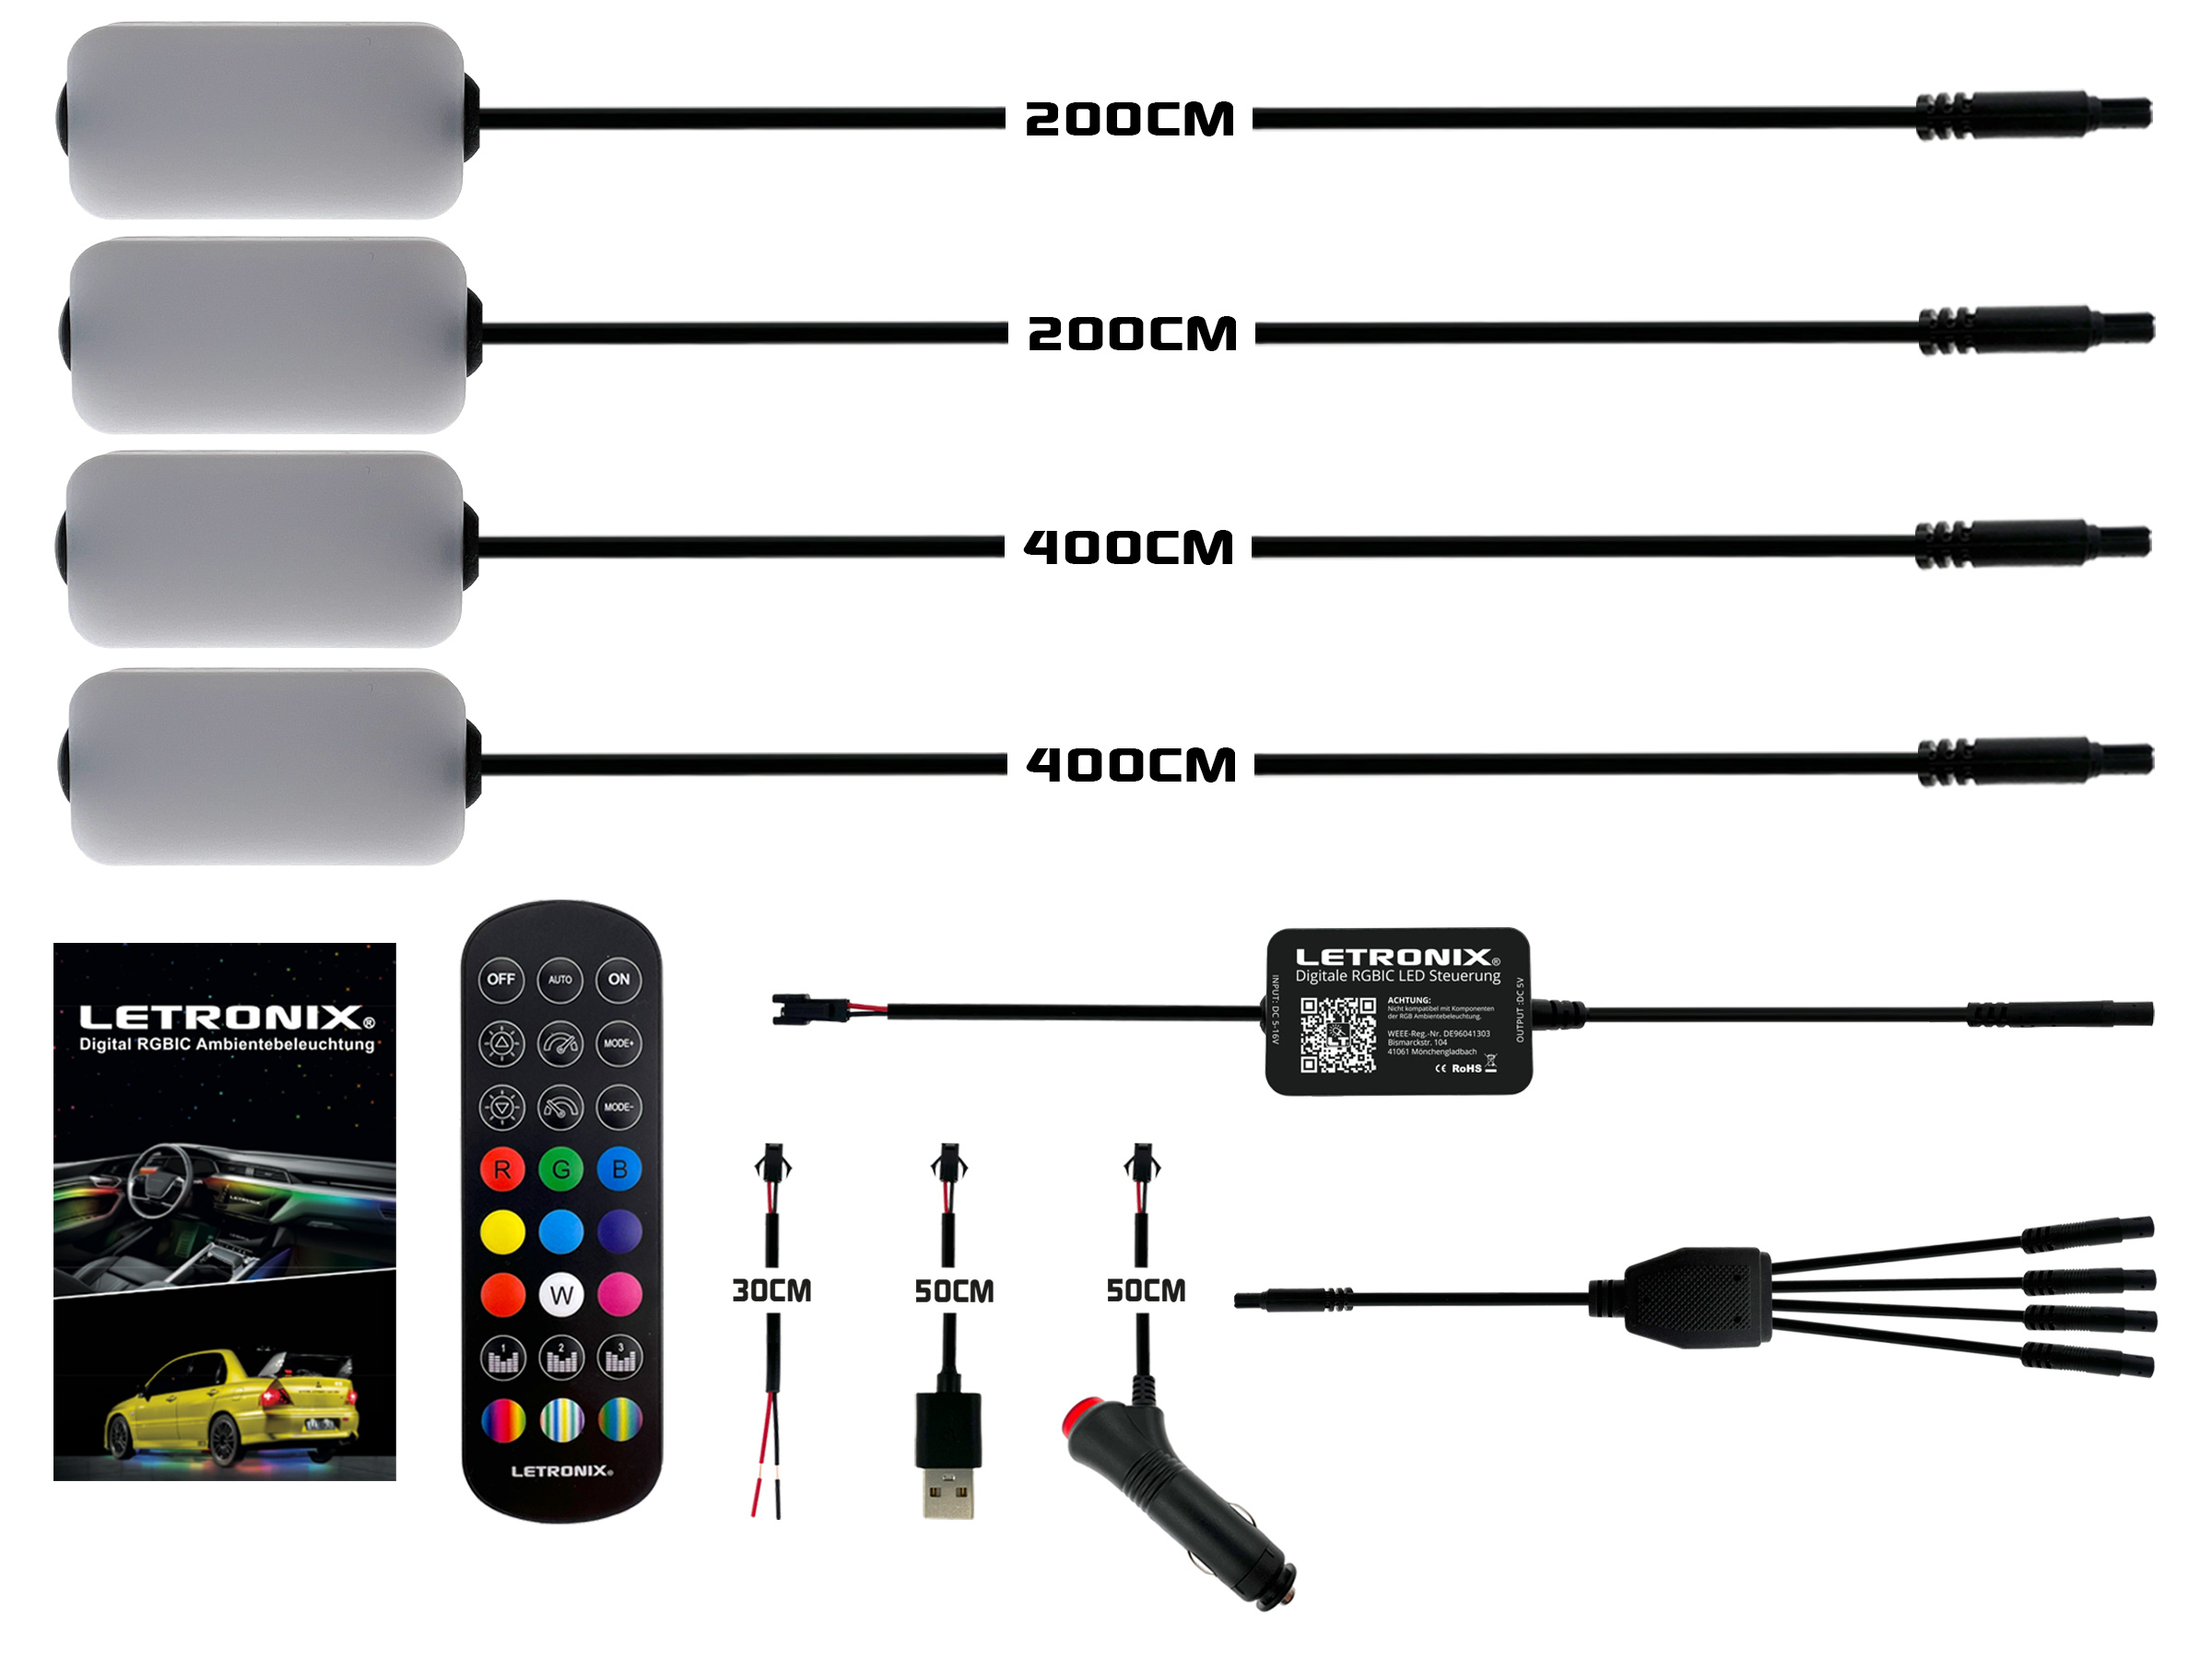 LETRONIX RGBIC LED Controller für RGBIC Full LED Ambientebeleuchtung